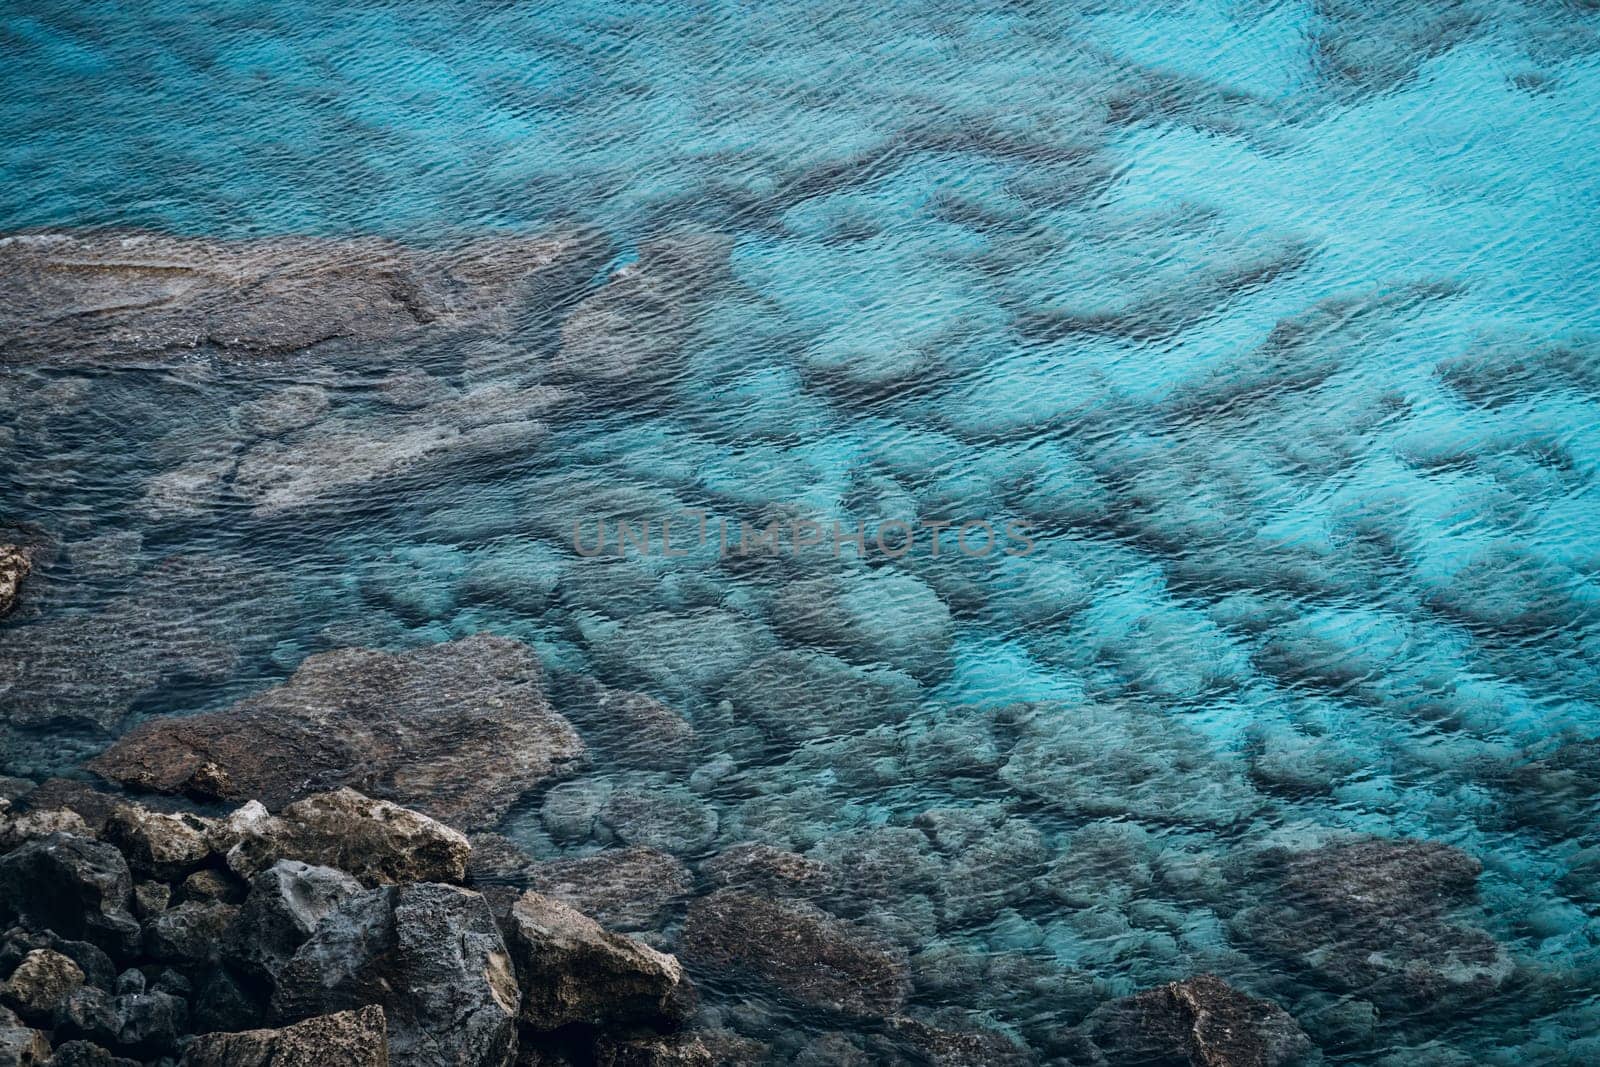 Top beach view of rocks underwater in Cape Greco National Park, Cyprus by Popov